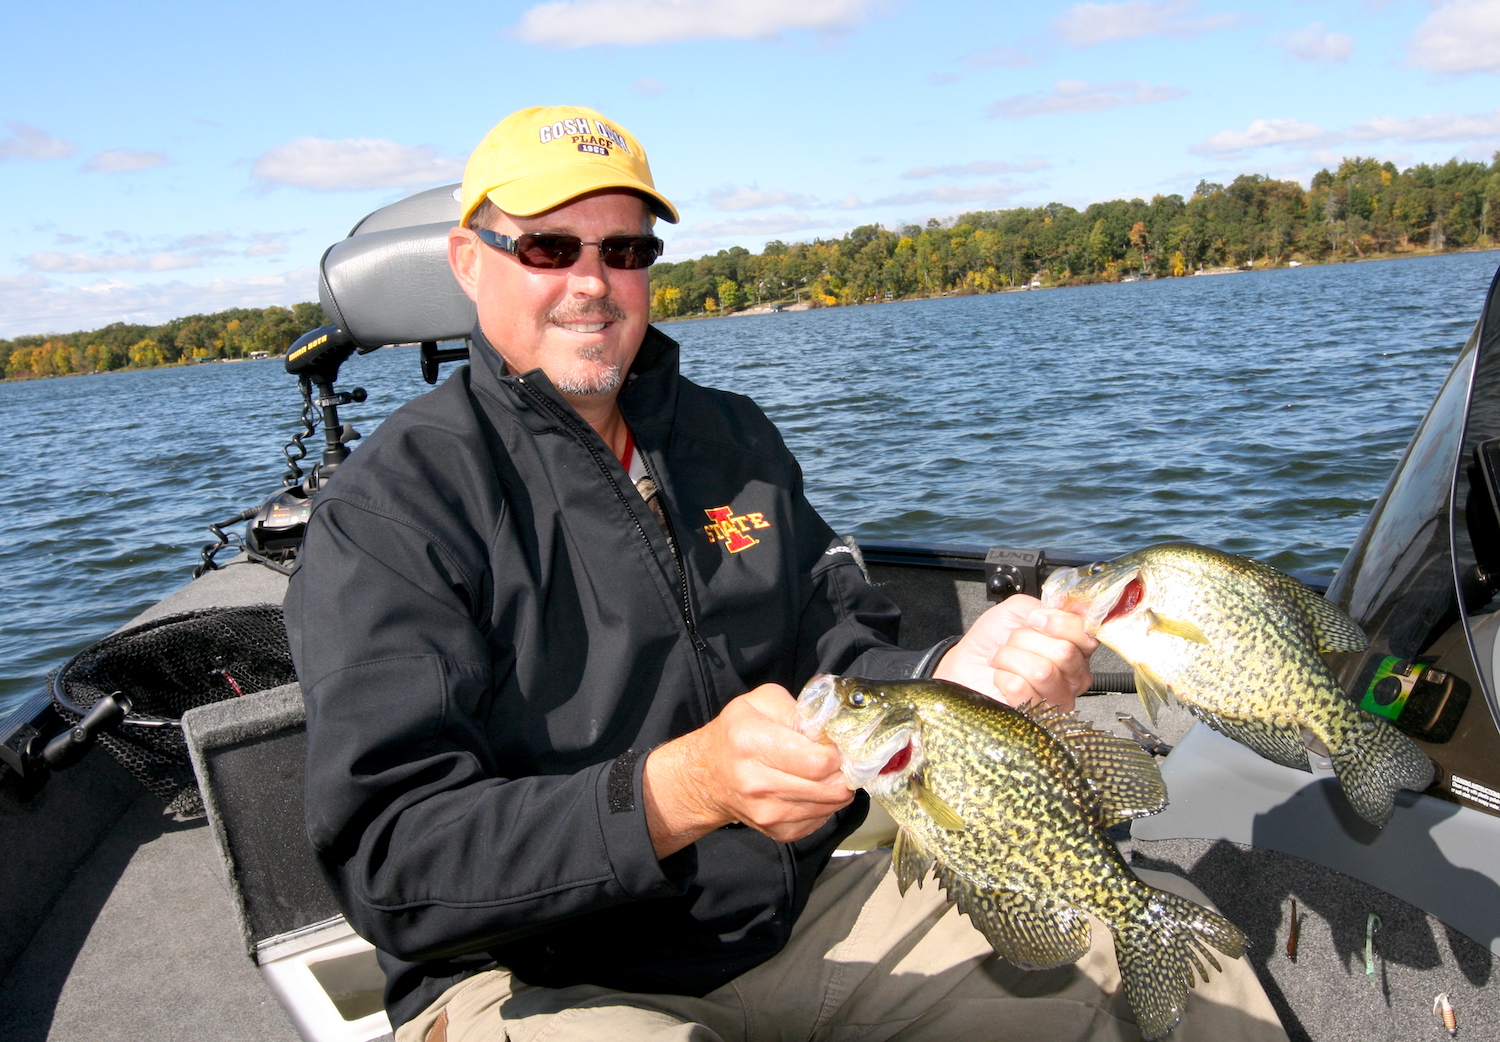 A man on a boat holding two crappies